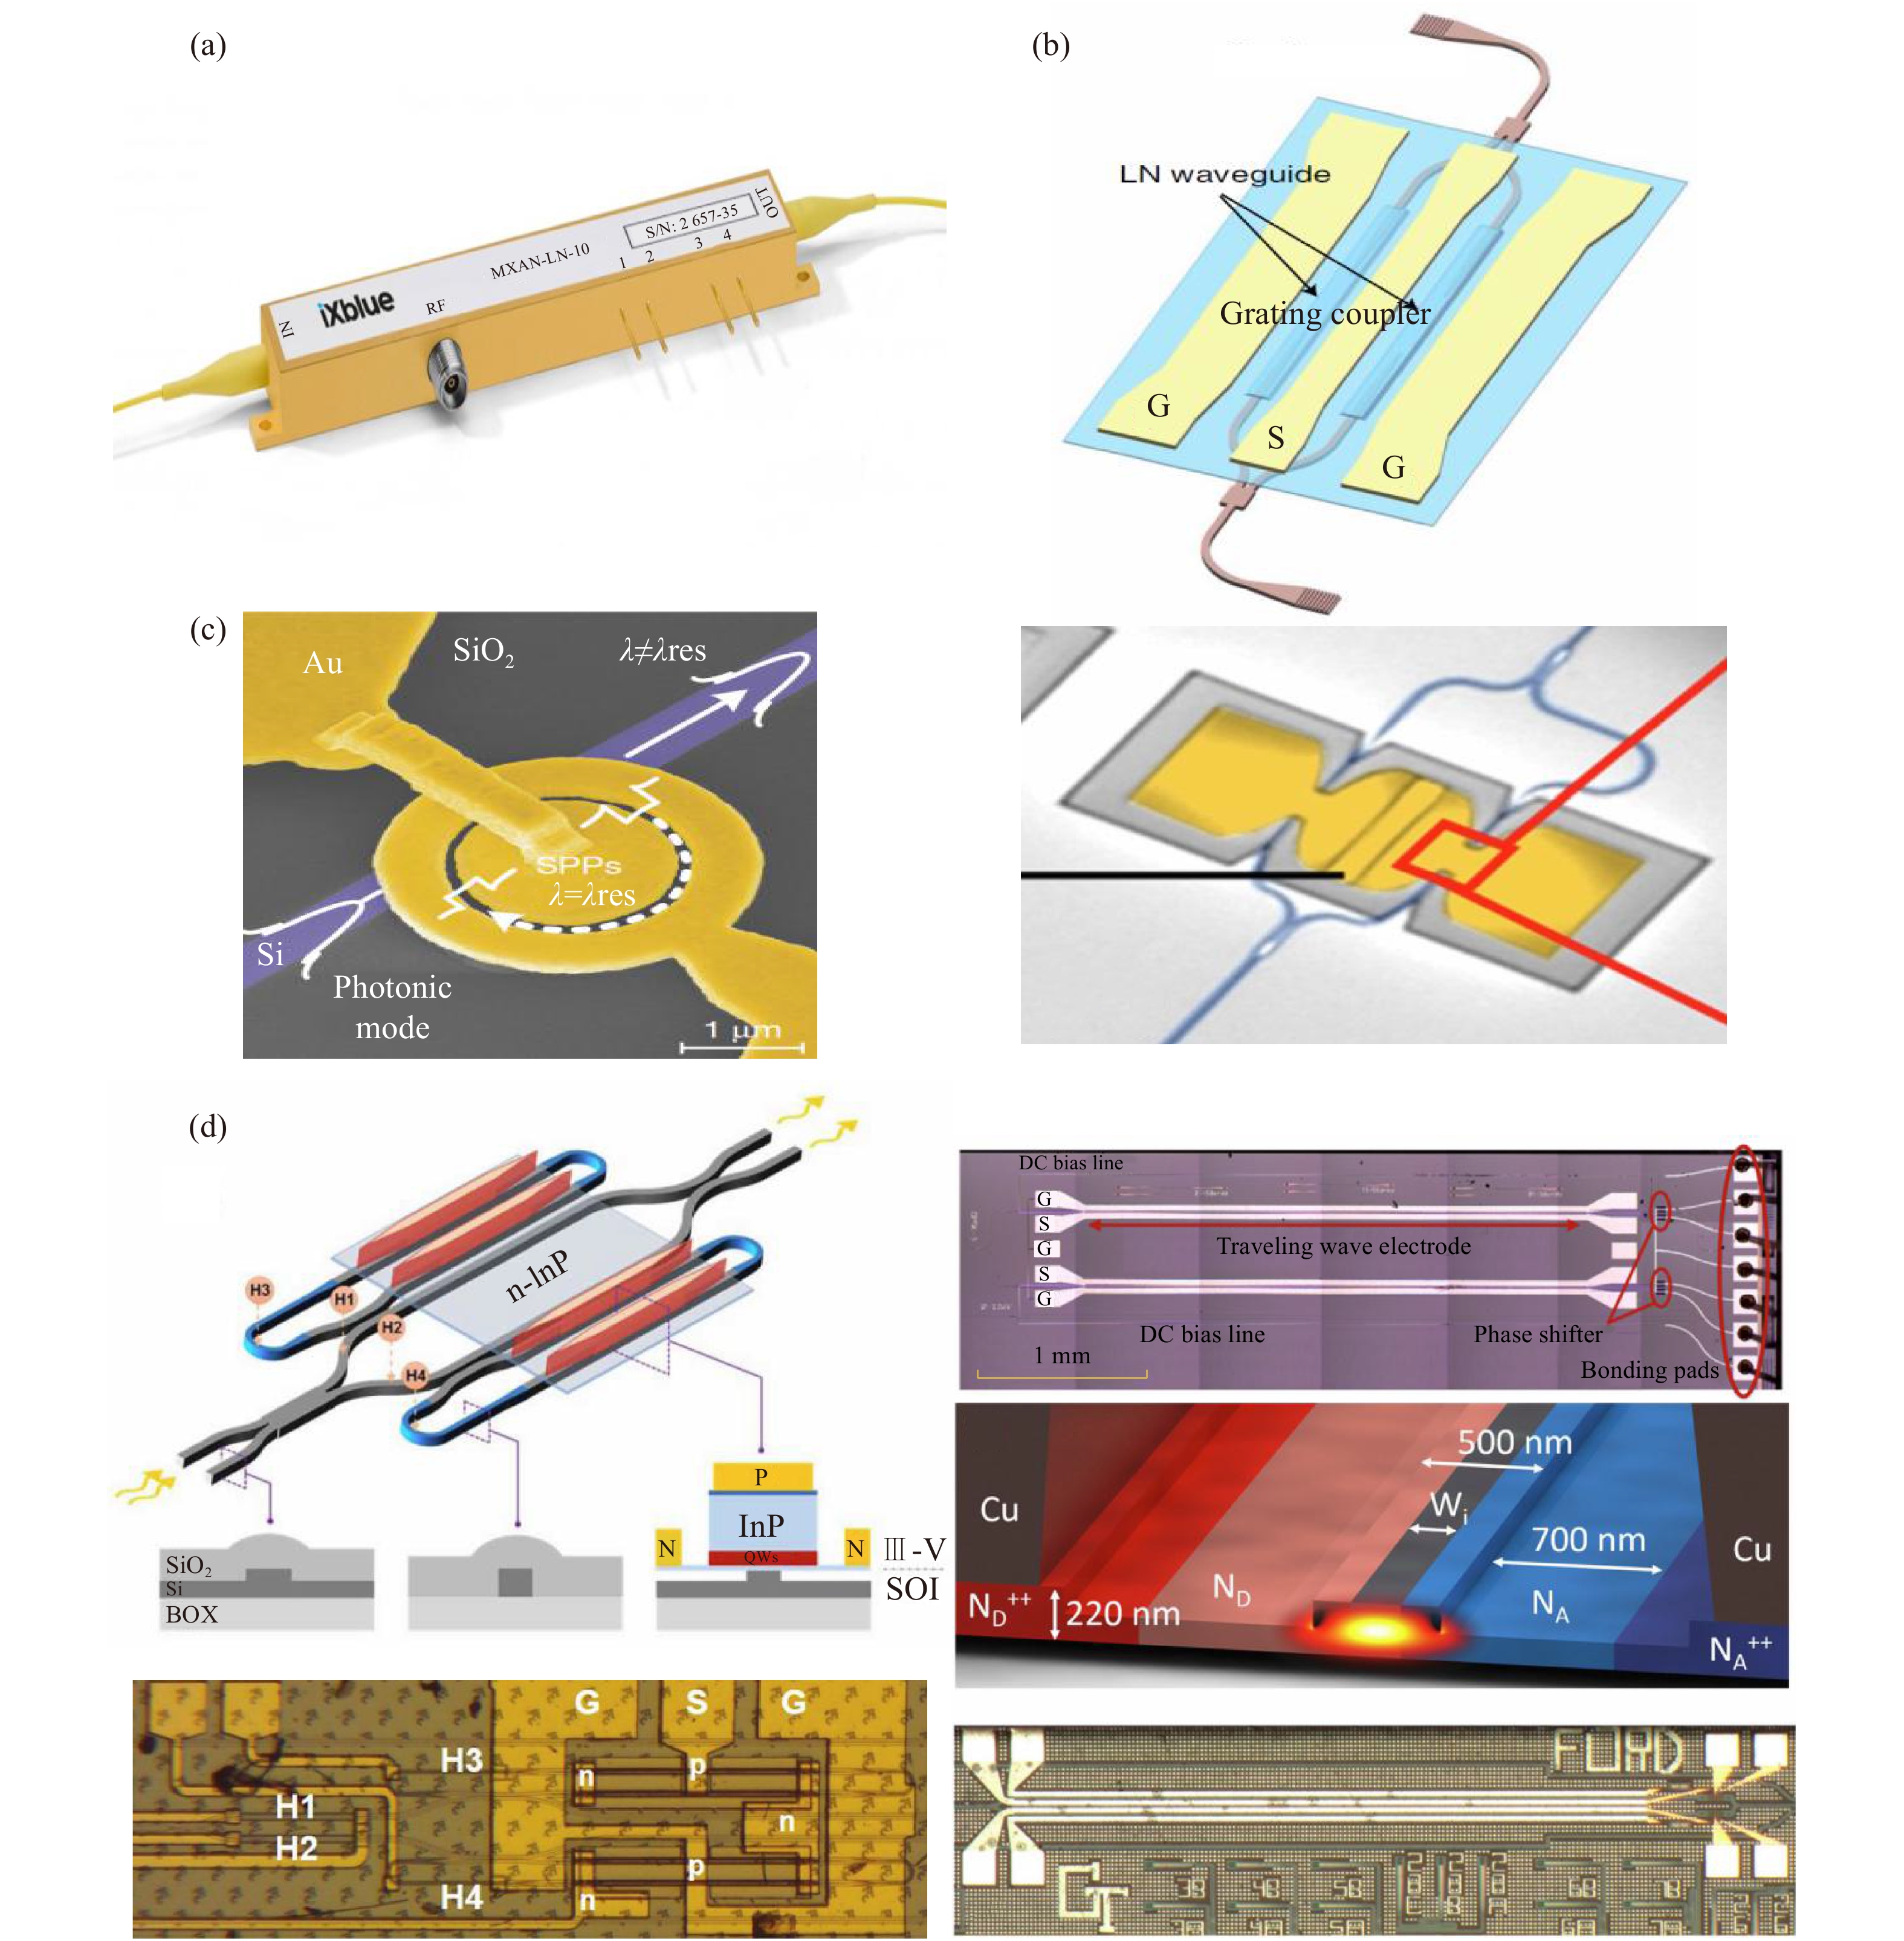 Electro-optic modulator with broad bandwidth and low half-wave voltage. (a) Traditional lithium niobate modulator[22]; (b) Thin-film lithium niobate modulator[23]; (c) Plasmonic modulator[14, 21]; (d) InP and silicon modulator with high linearity[24-26]